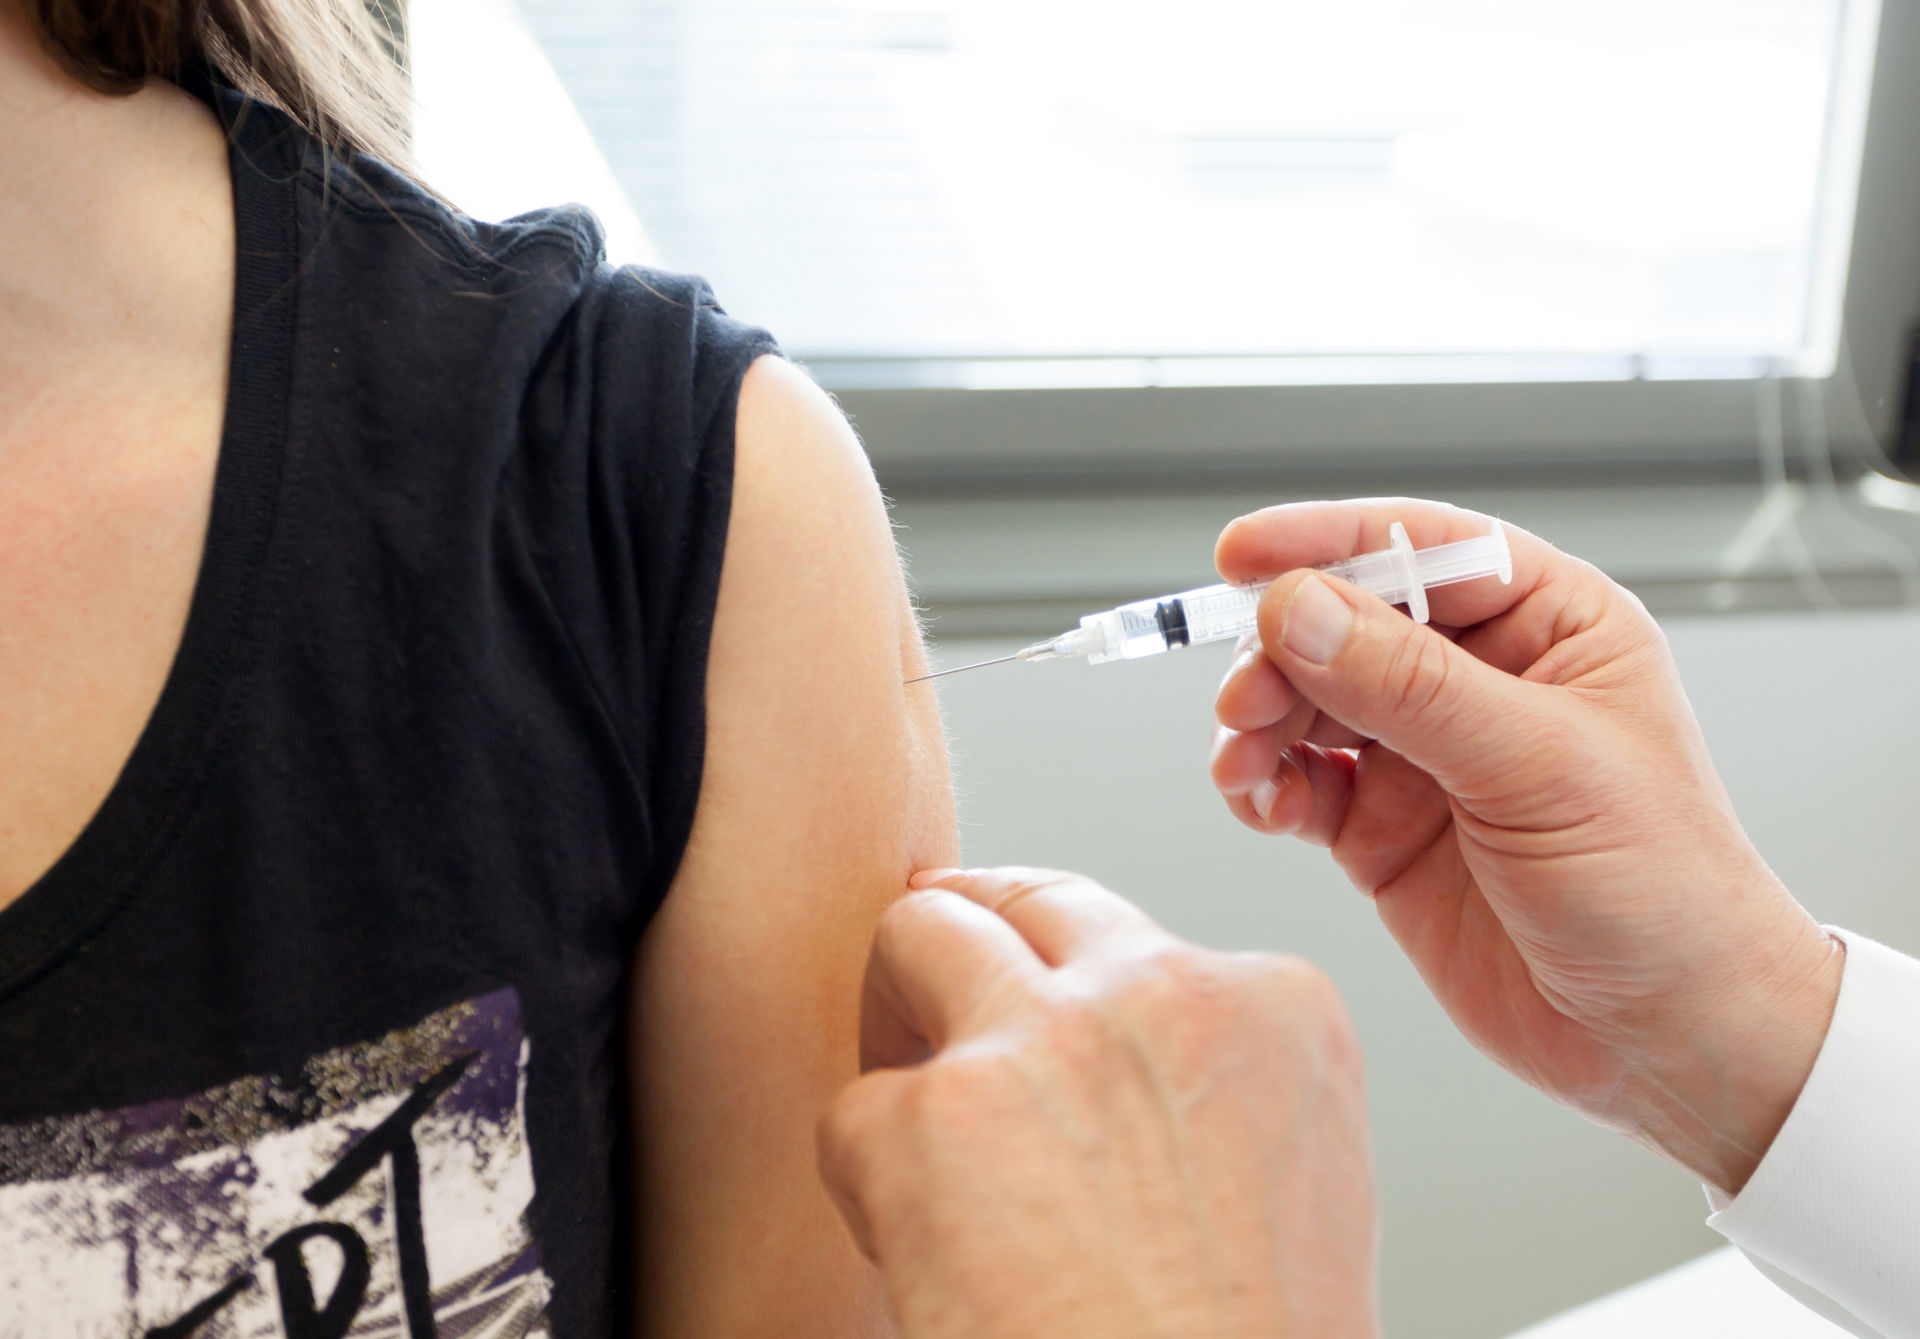 Female receiving contraceptive injection